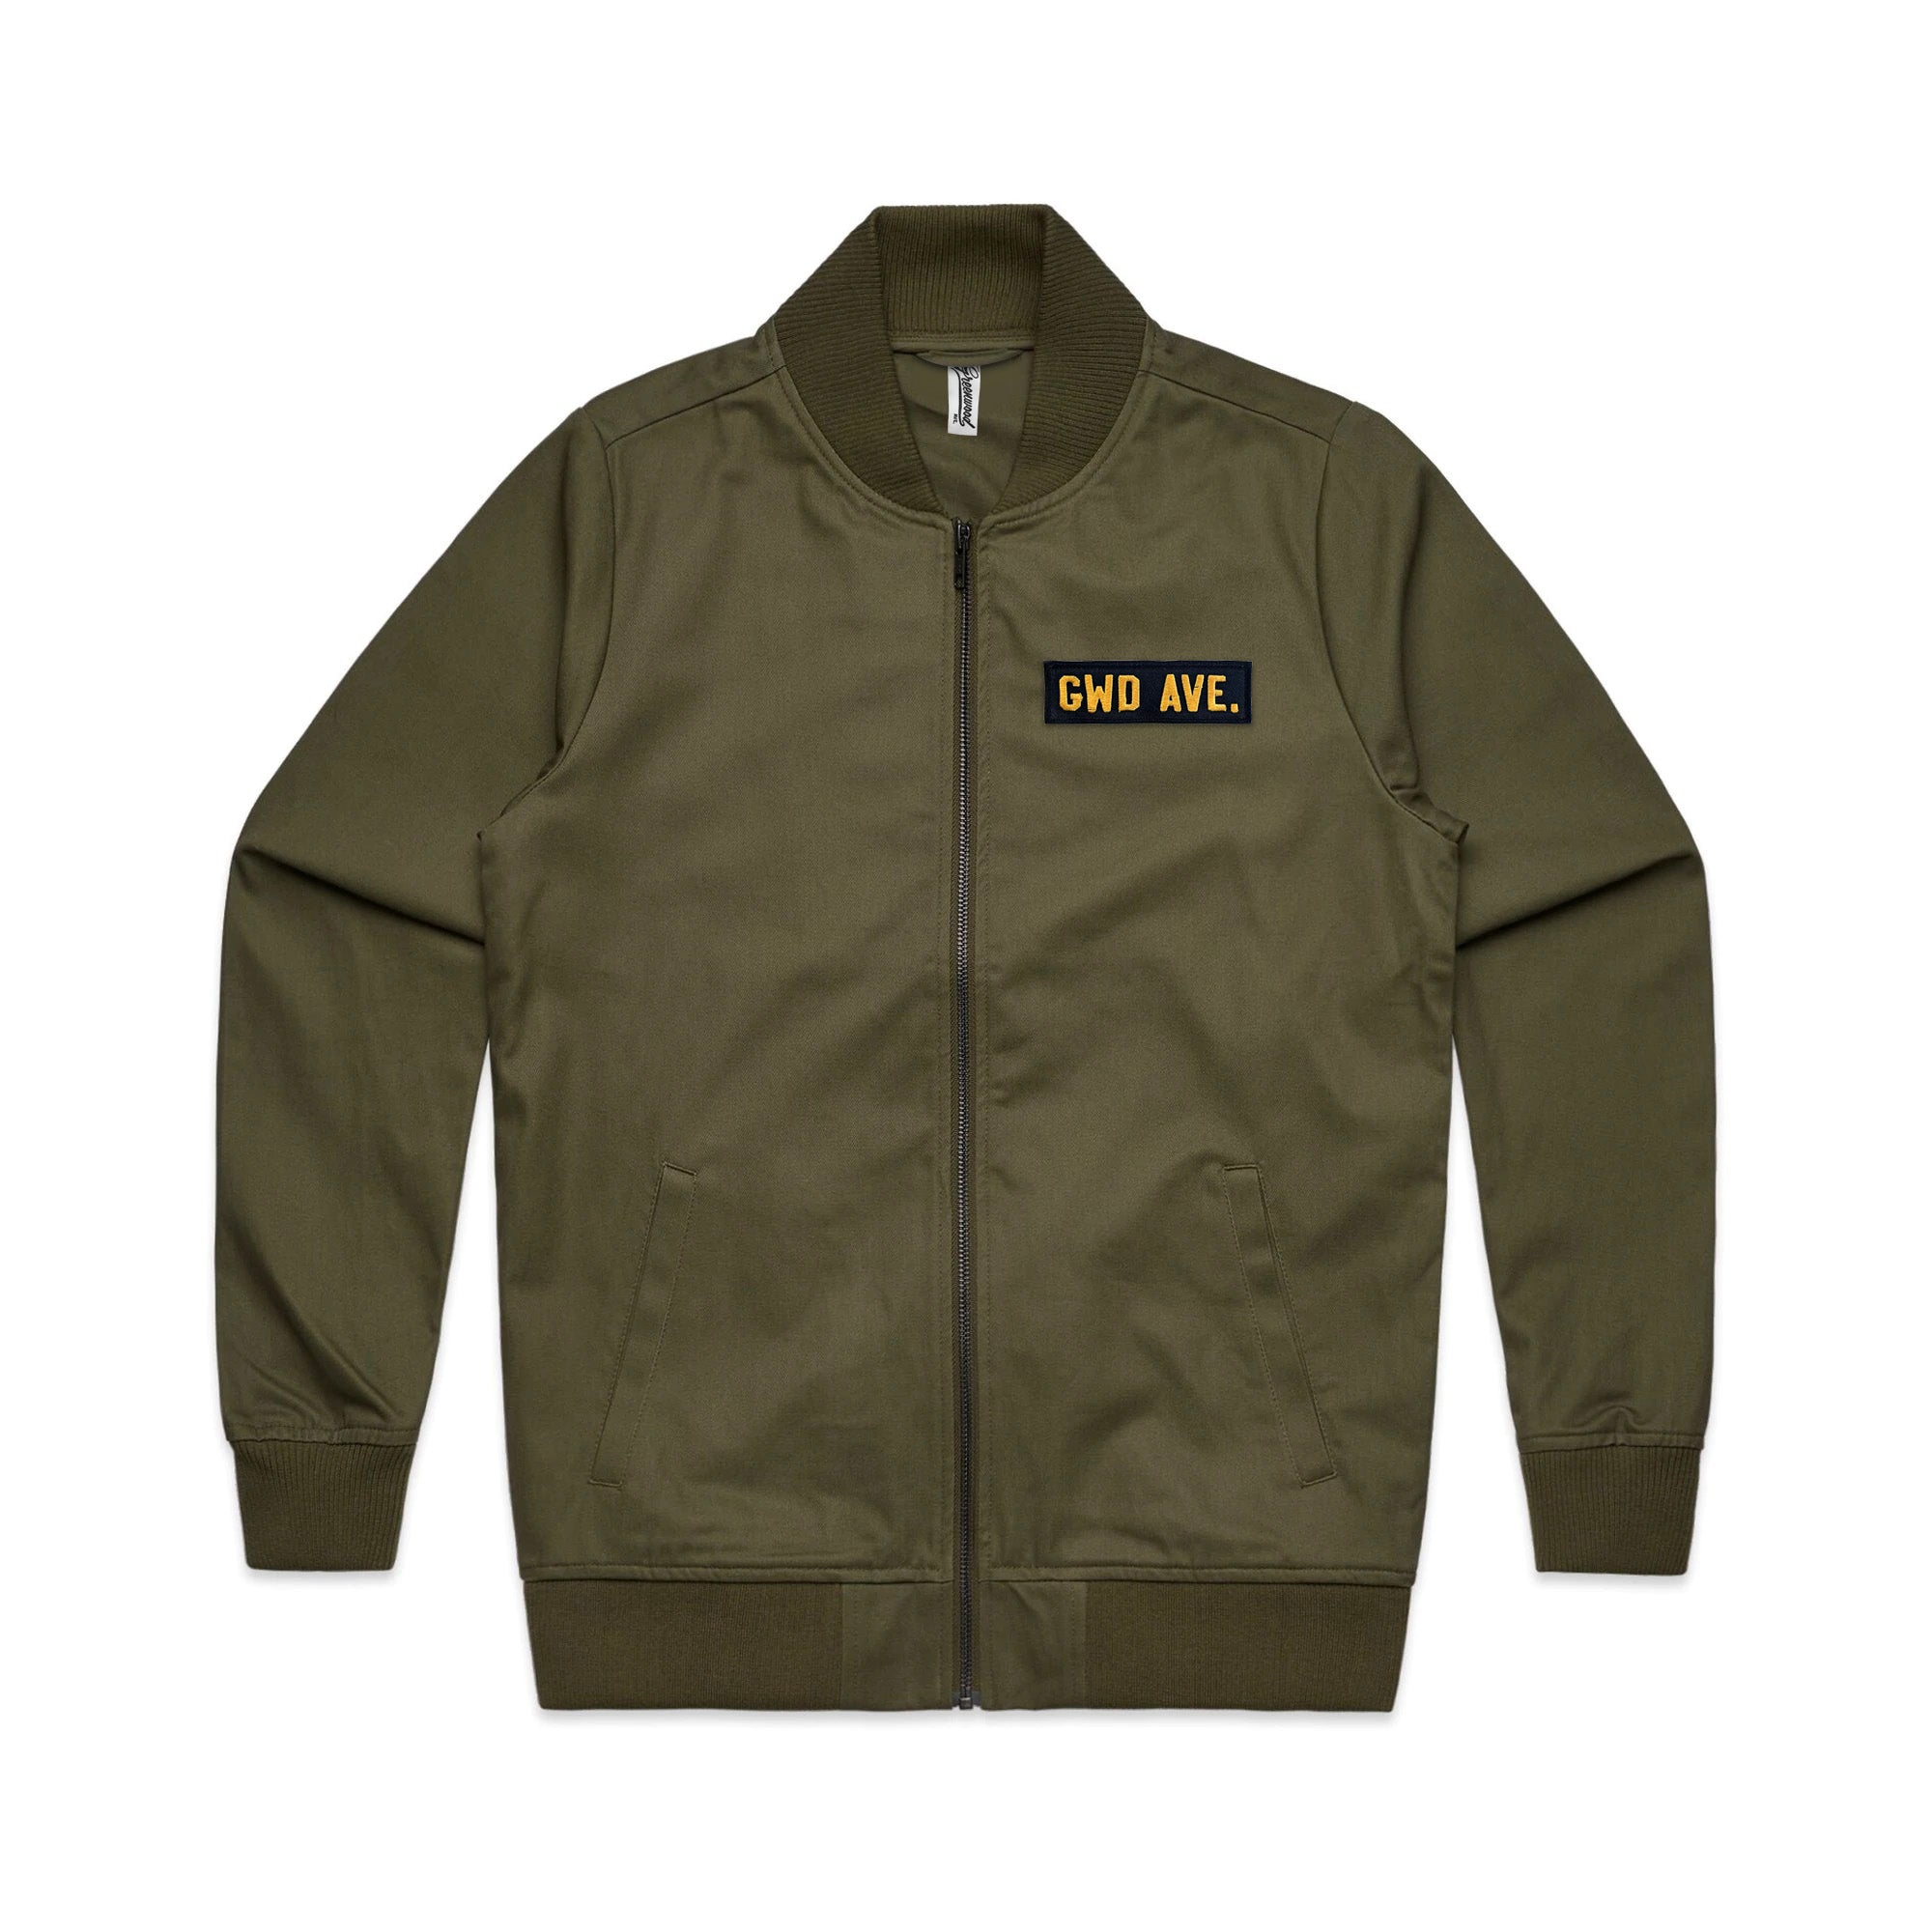 Army Bomber (Green) – Greenwood Ave.